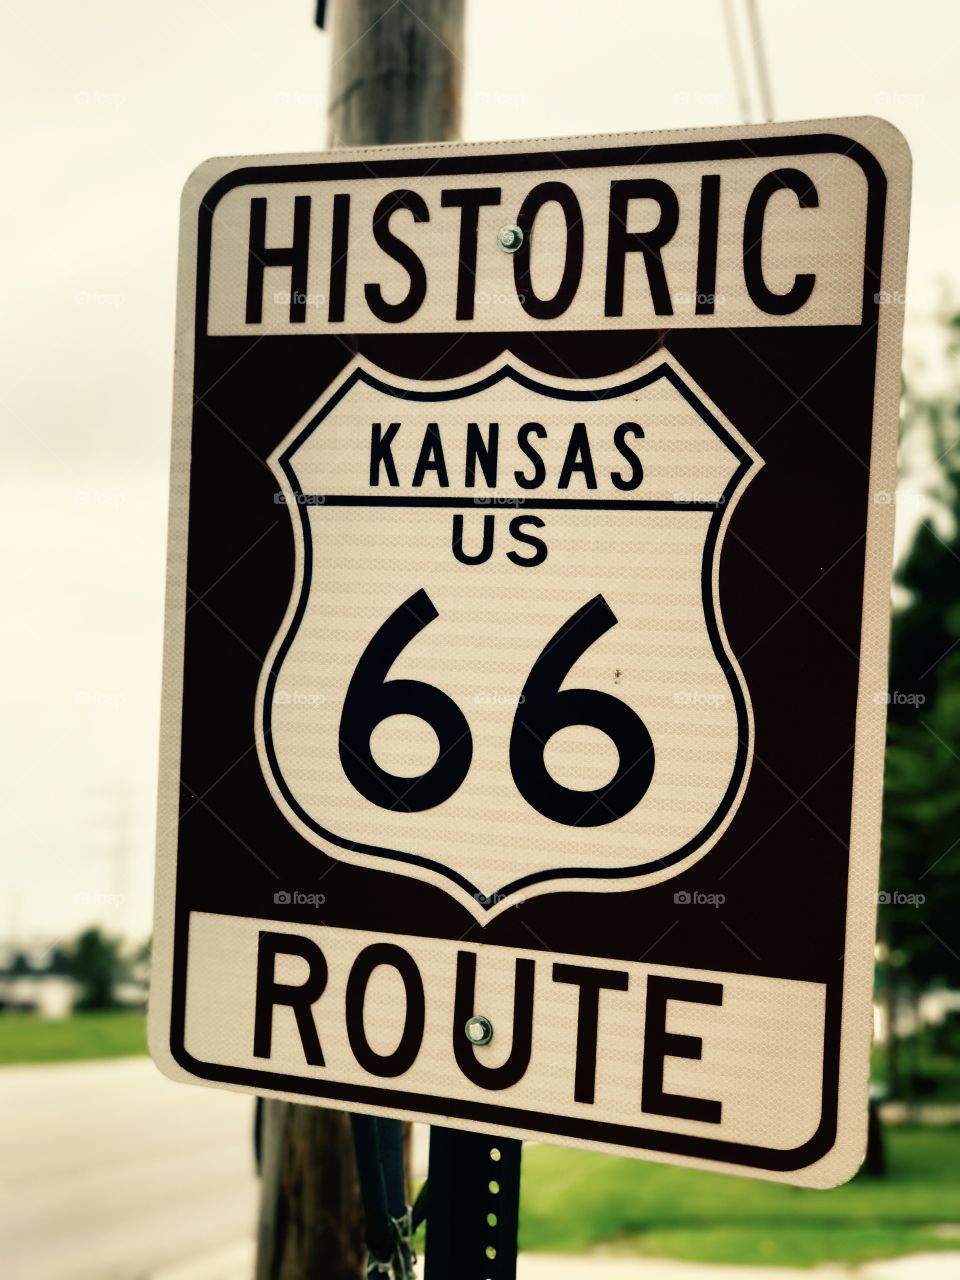 Get your kicks on Route 66 😎